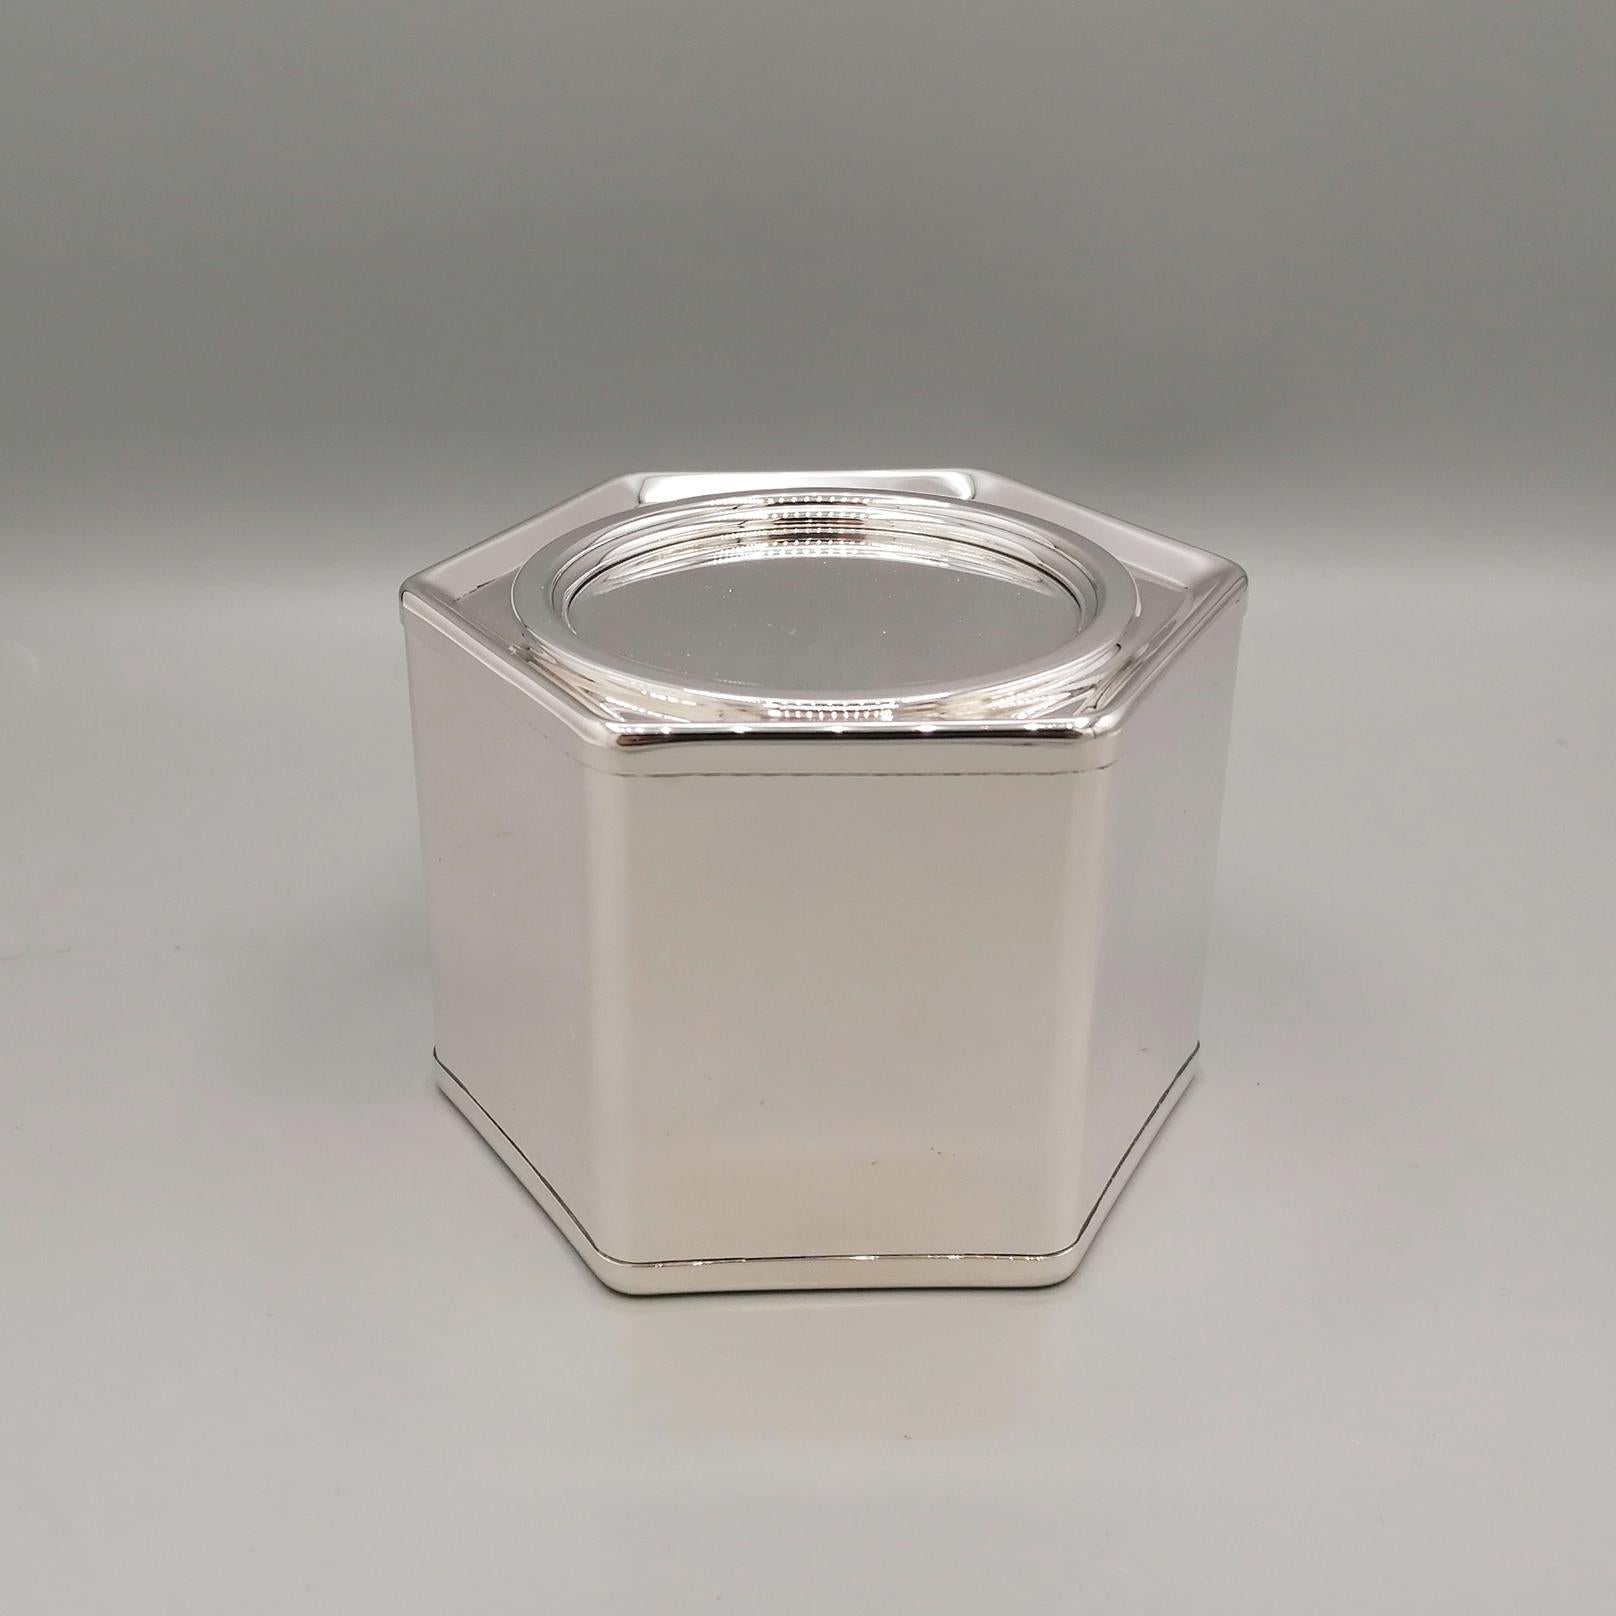 21st century Italian Sterling Silver hexagonal Tea/Caddy Box
Hexagonal sterling silver tea box, 
shaped completely by hand. 
The body has rounded edges and has been left completely smooth. 
Inside the box, a food-grade material interior has been